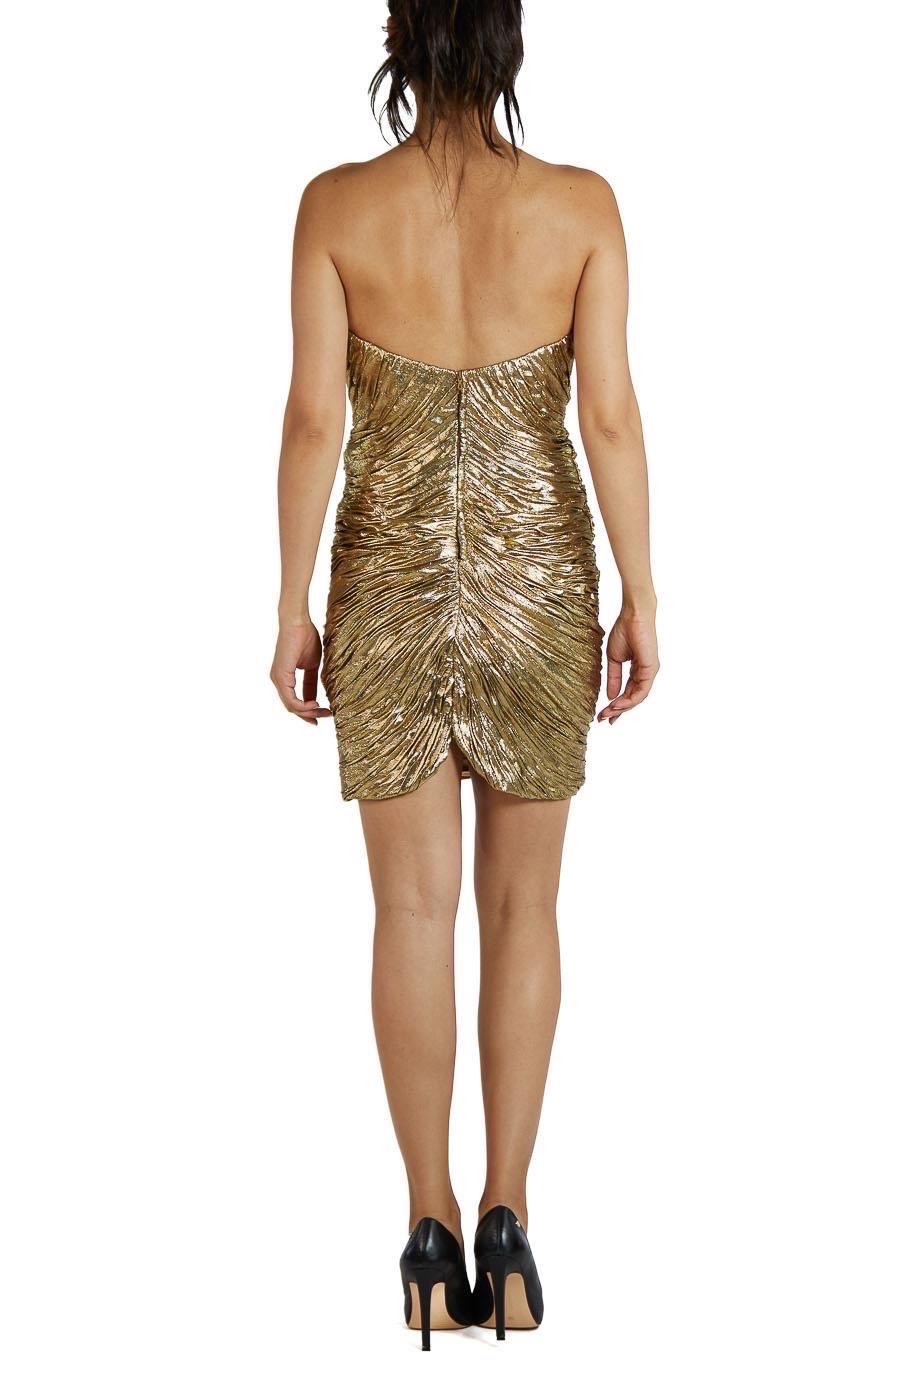 1980S VICKY TIEL FOR BERGDORF GOODMAN Metallic Gold Lamé Ruched Strapless Cockt For Sale 2